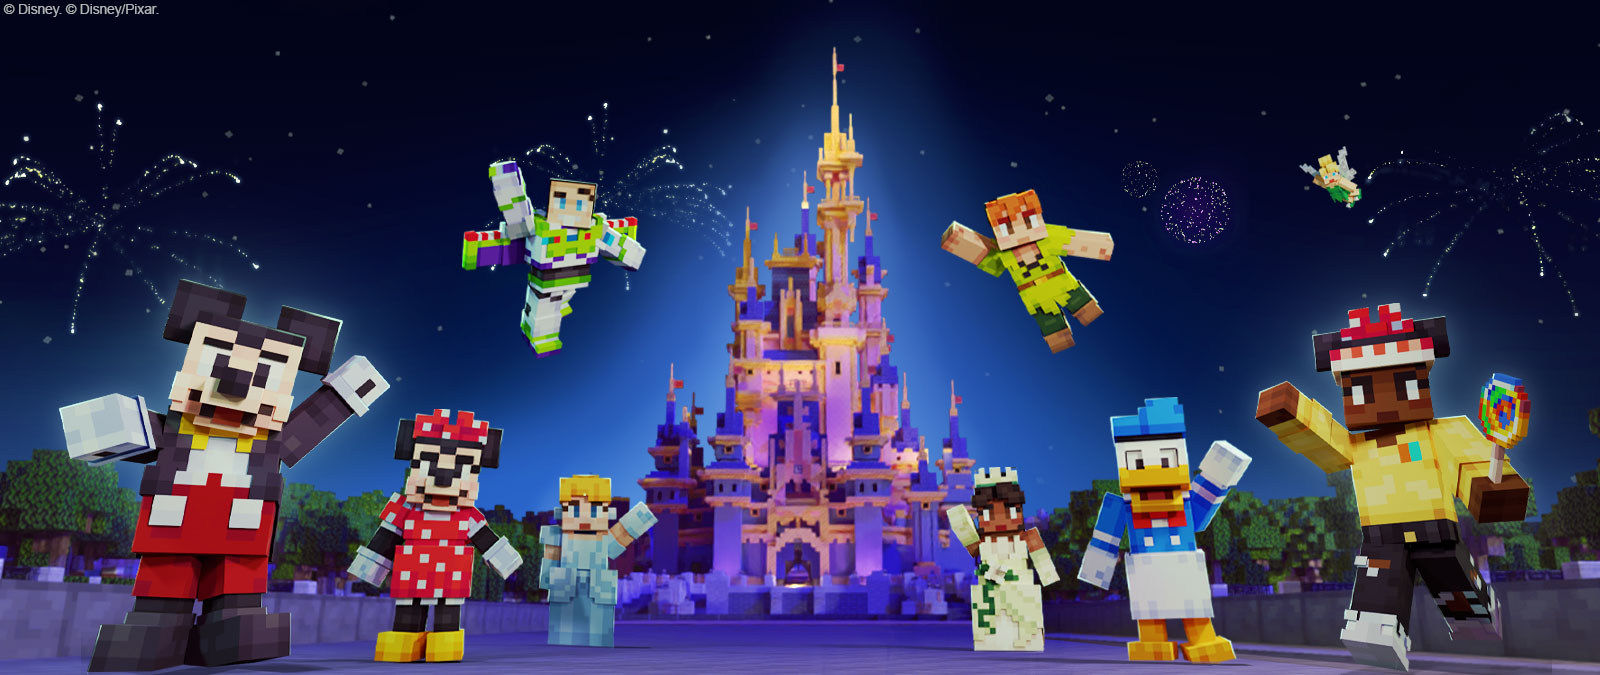 Mickey Mouse, Minnie Mouse, Buzz Lightyear, Cinderella, Peter Pan, Tiana, Donald Duck, Tinkerbell, and another character in Minecraft style in front of the Disney castle